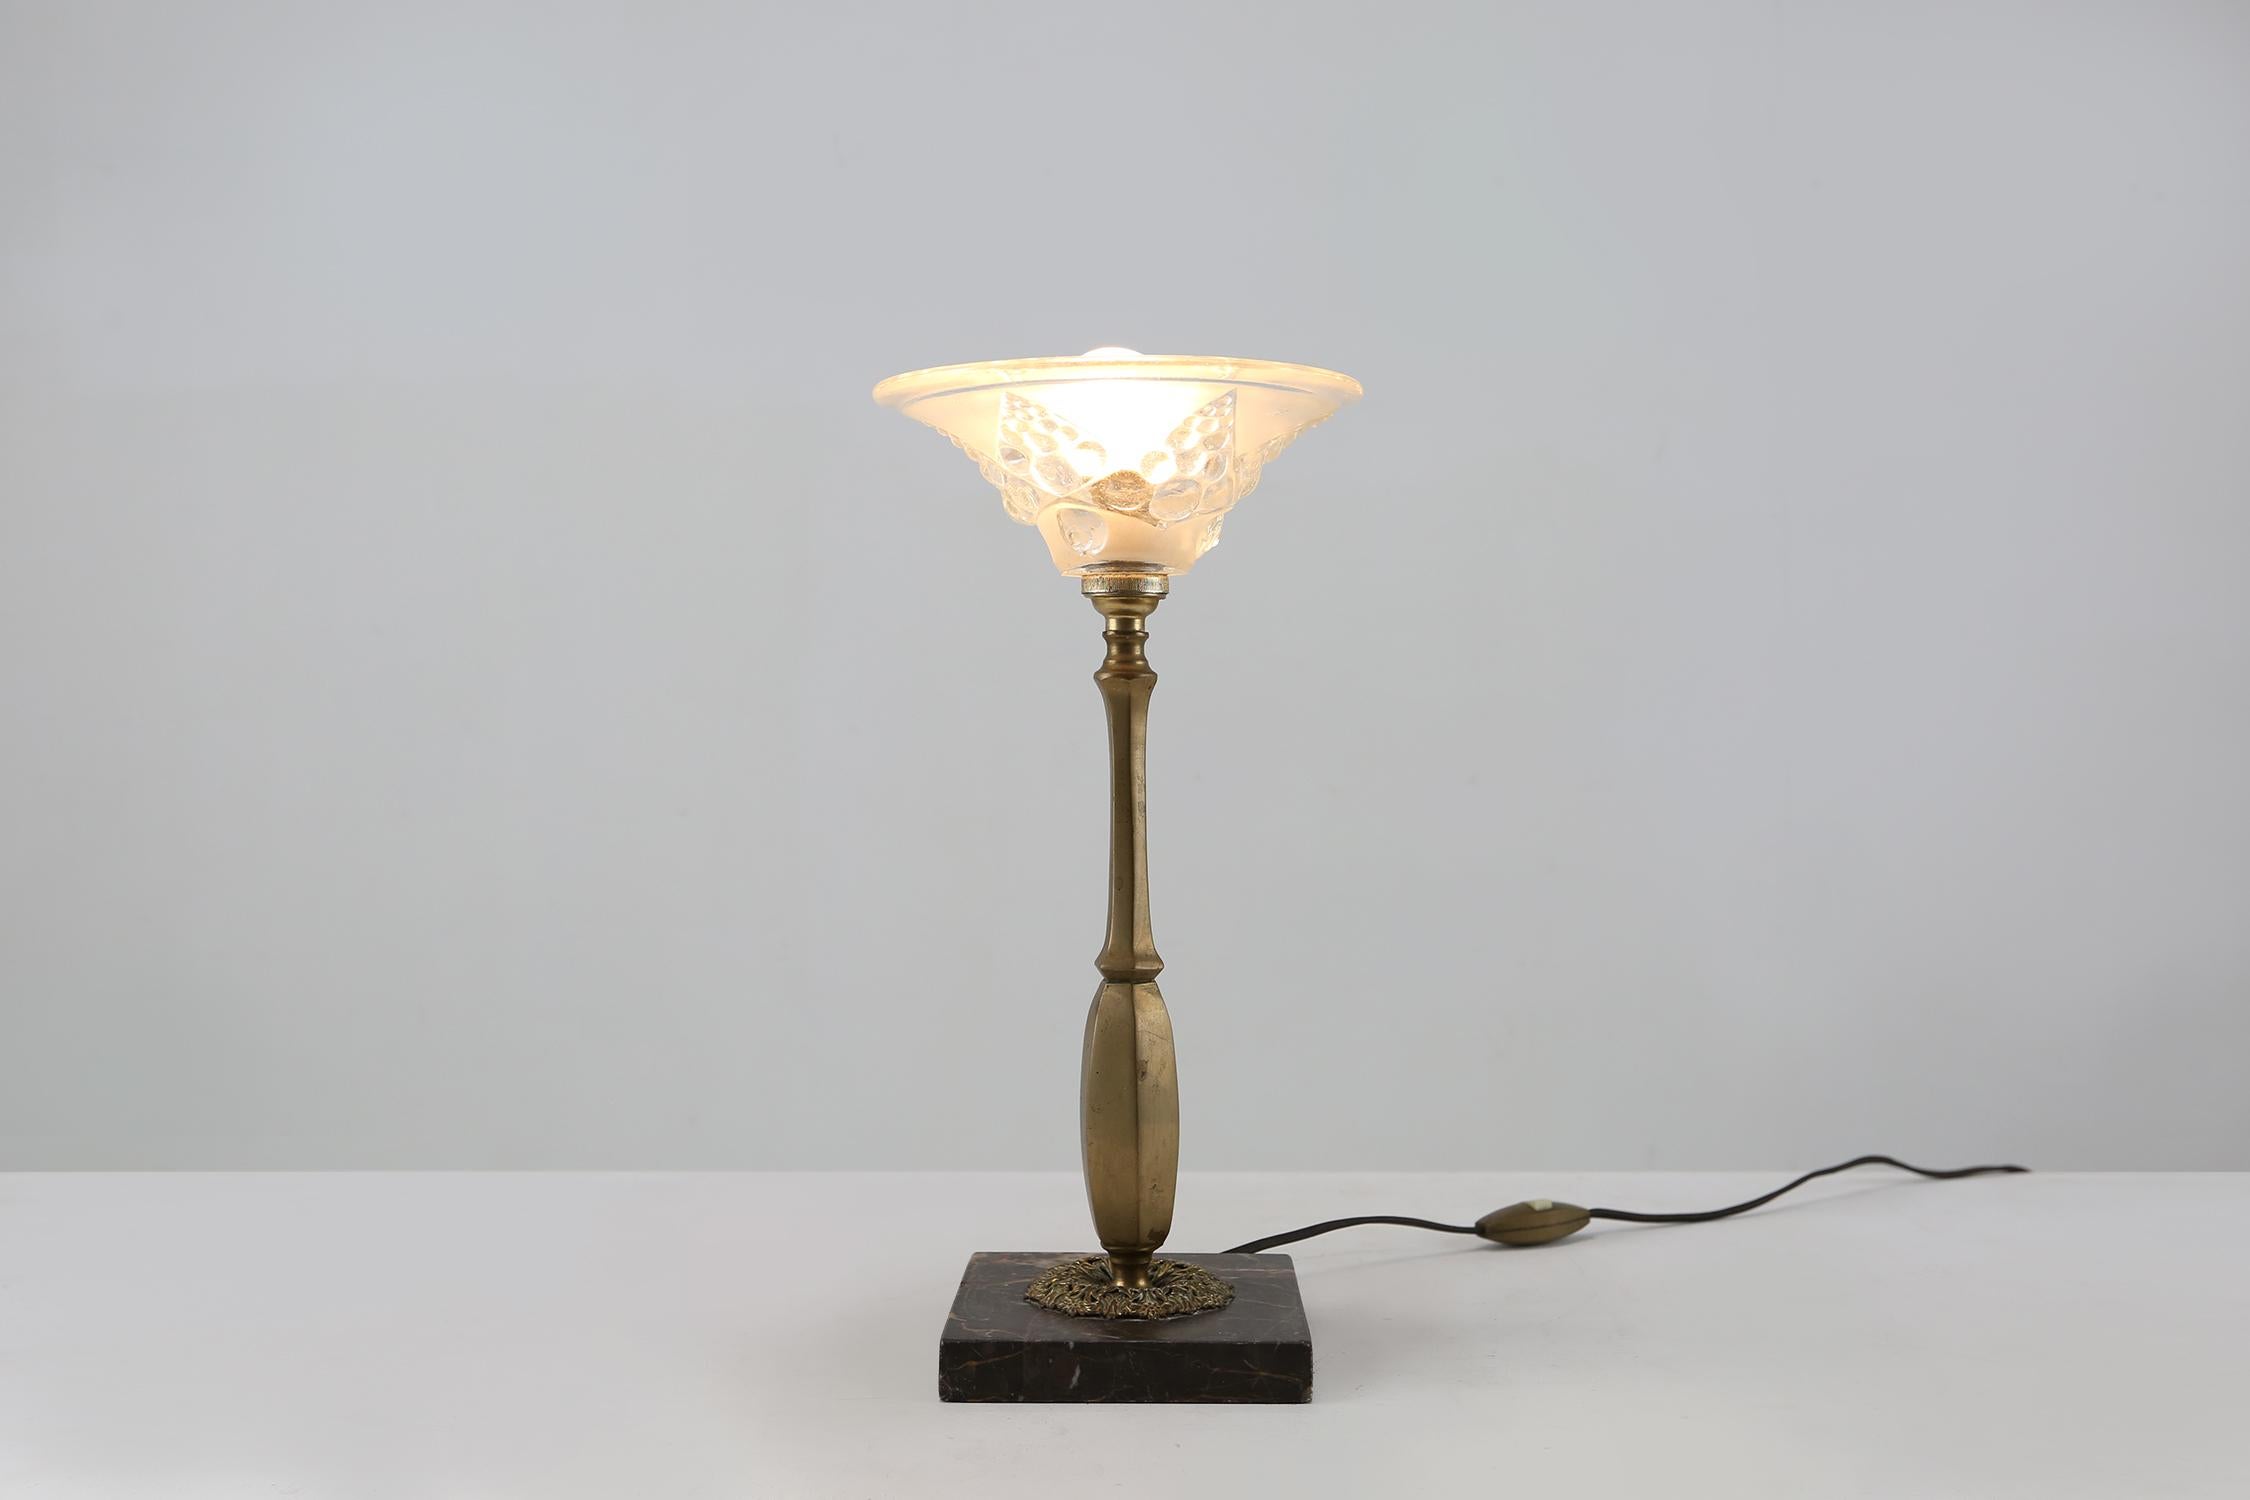 French Art Nouveau table lamp made around 1920. made of brass, glass and marble. With some nice details in the glass and brass.